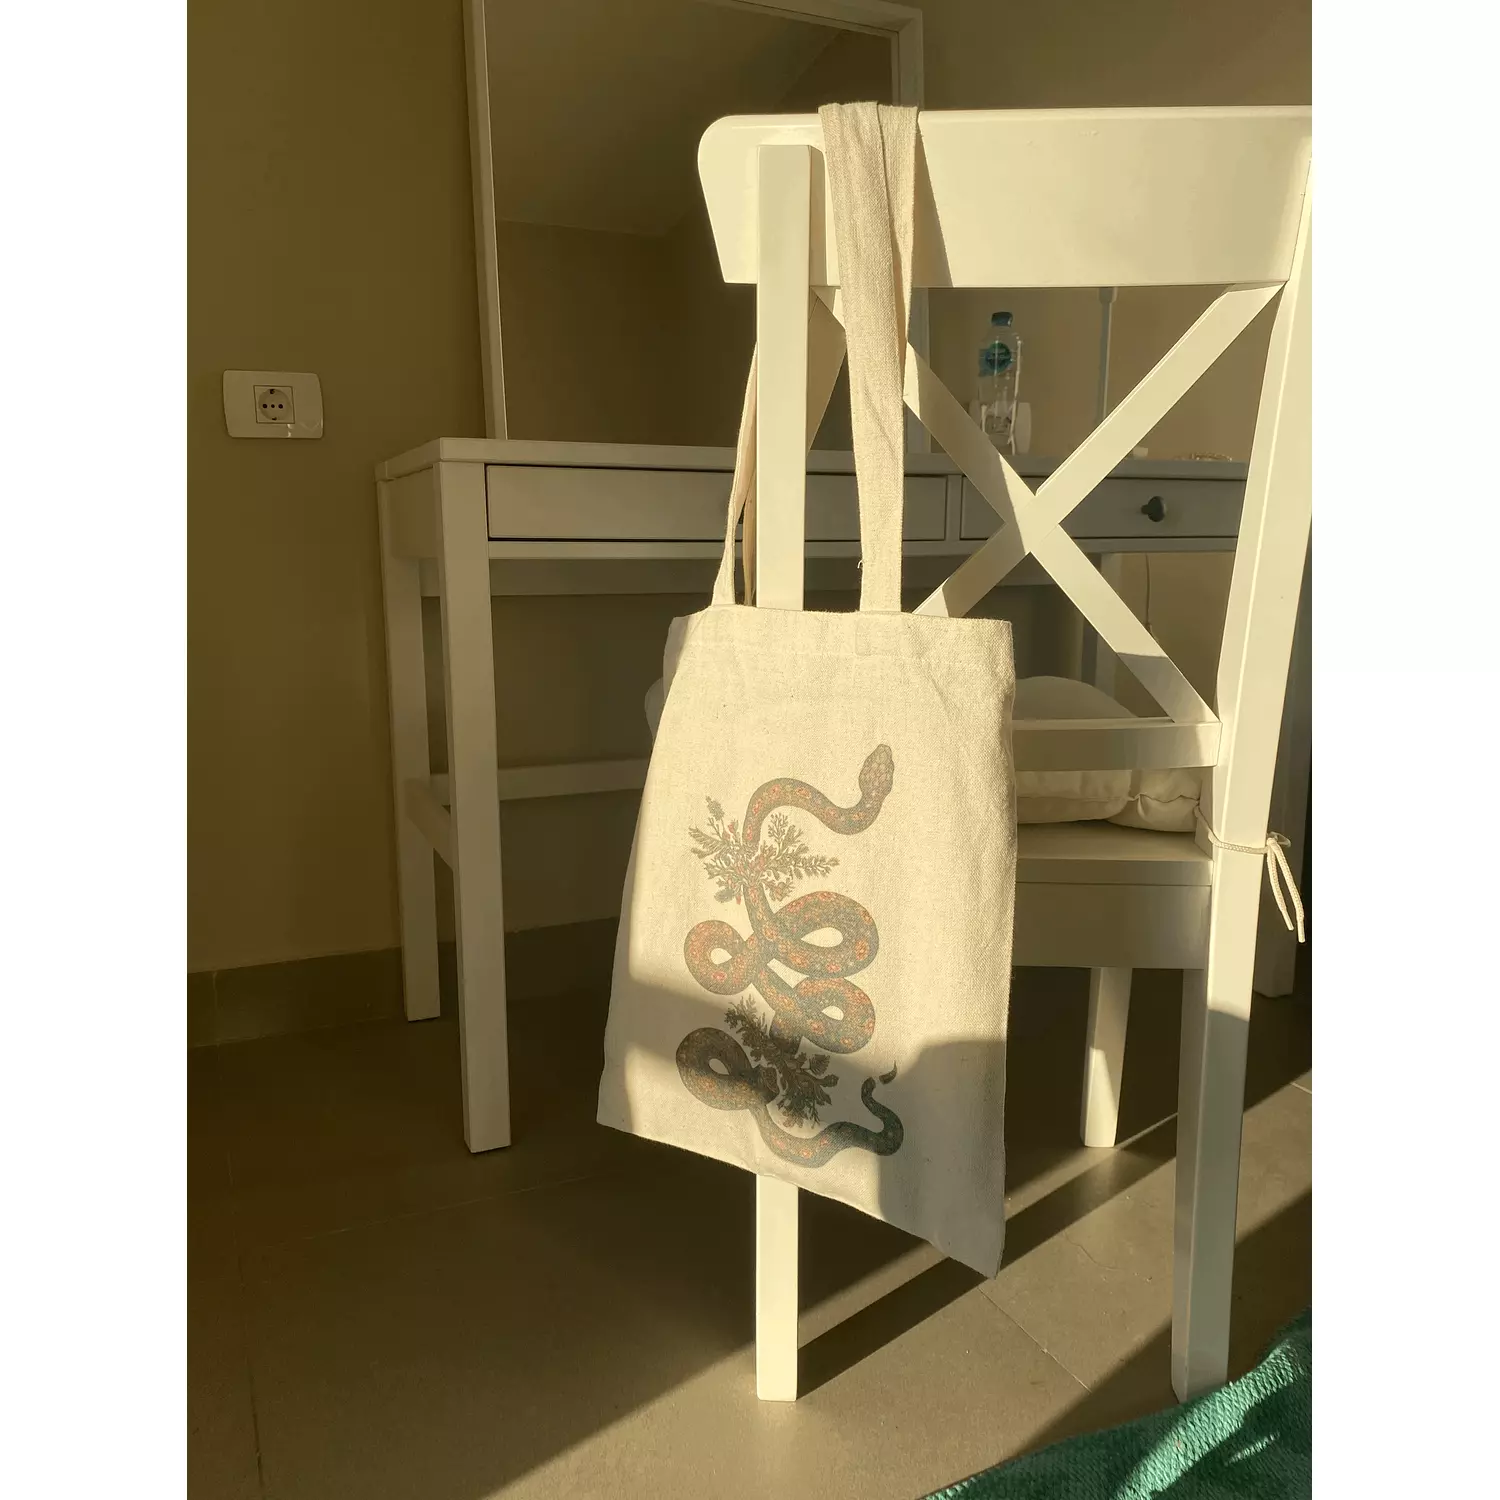 The "Snake" tote bag  hover image